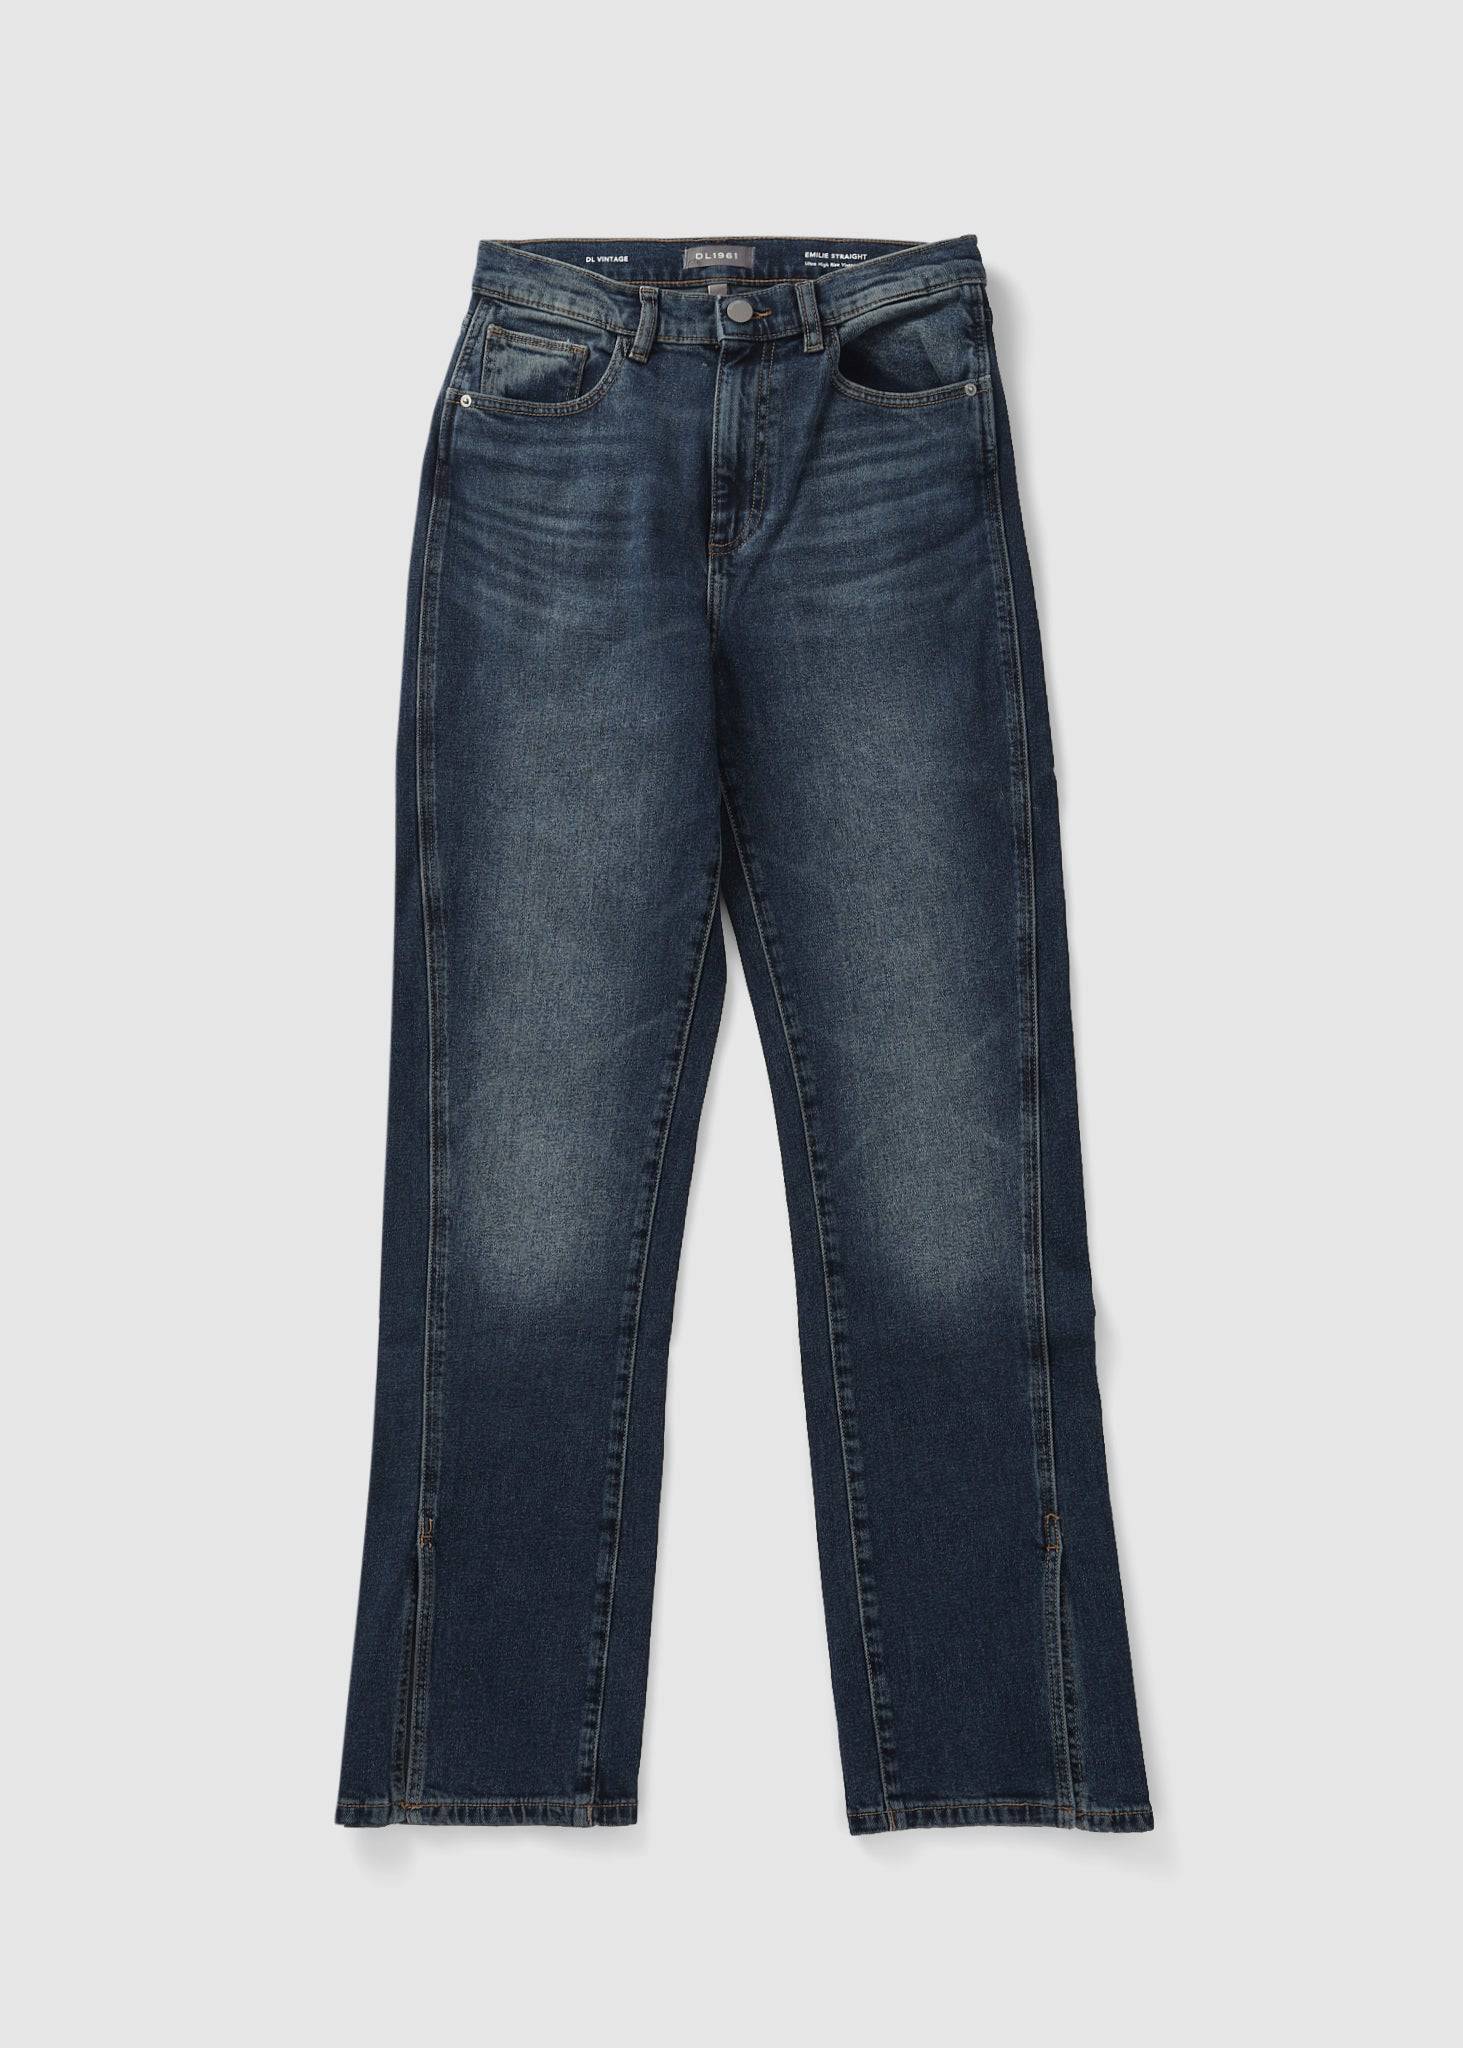 Image of Dl1961 Womens Emilie Straight Ultra High Rise Vintage 31' Jeans In Thundercloud